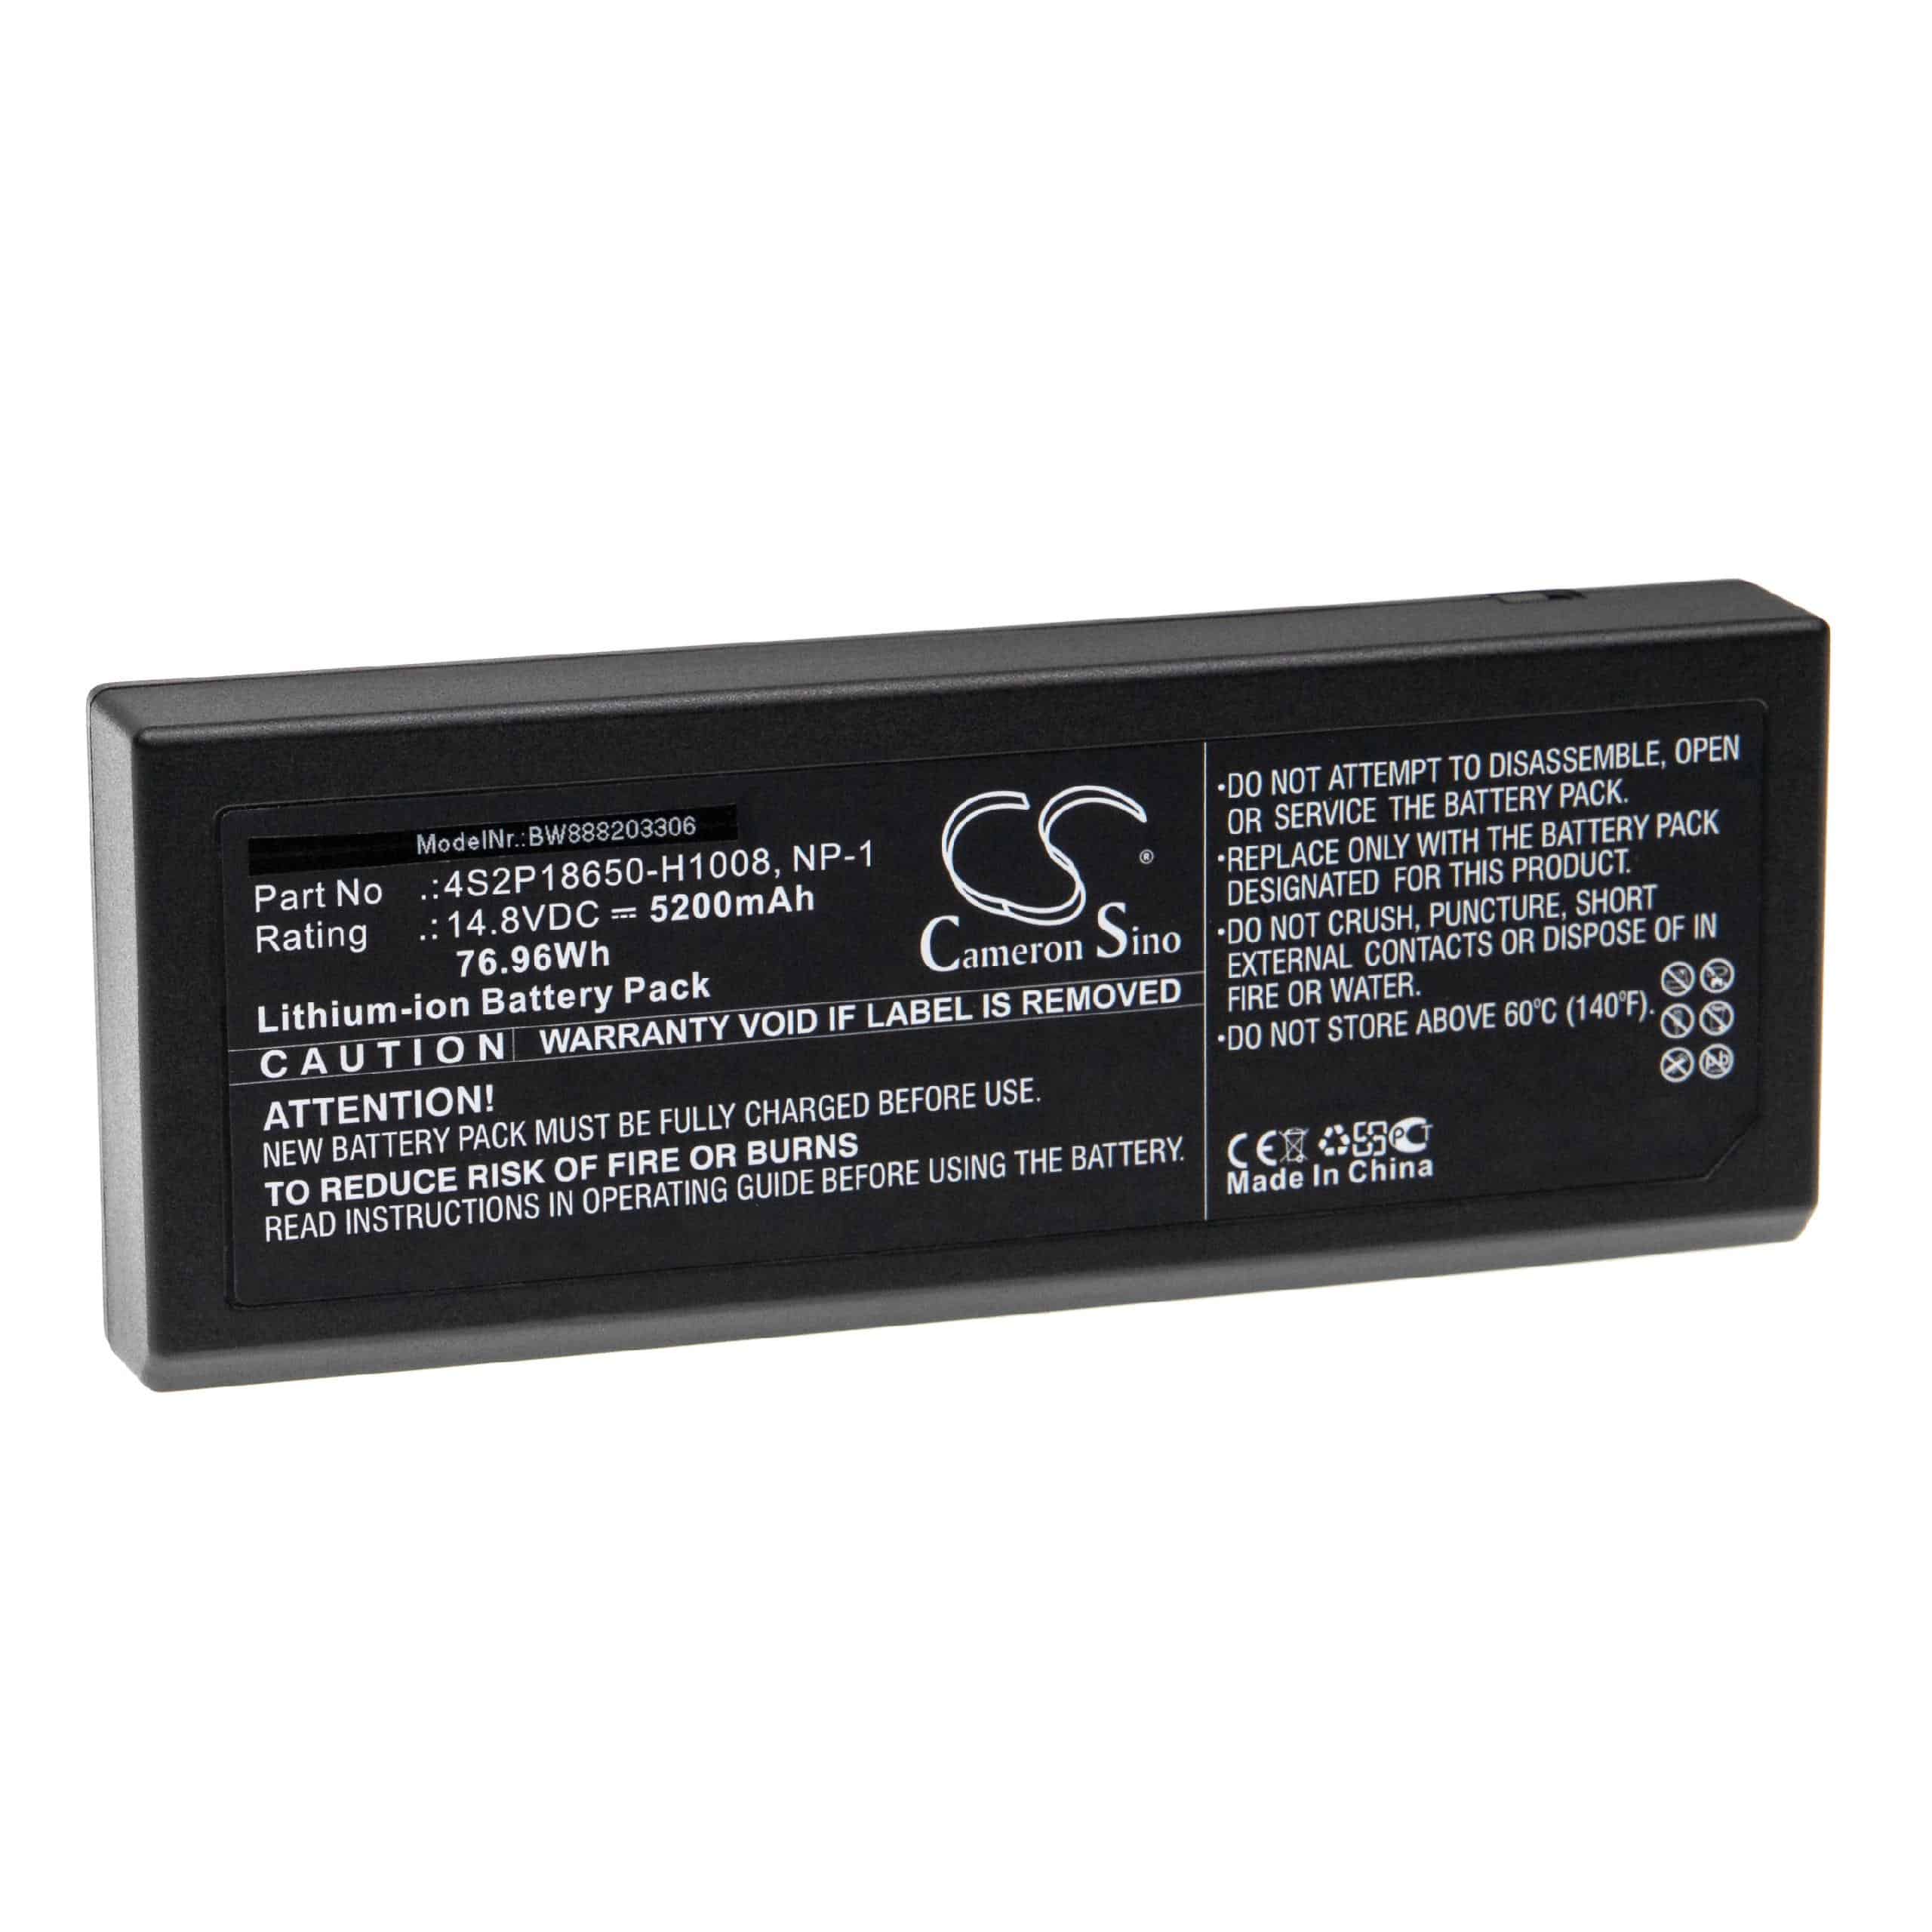 Medical Equipment Battery Replacement for Biocare 4S2P18650-H1008, NP-1 - 5200mAh 14.8V Li-Ion